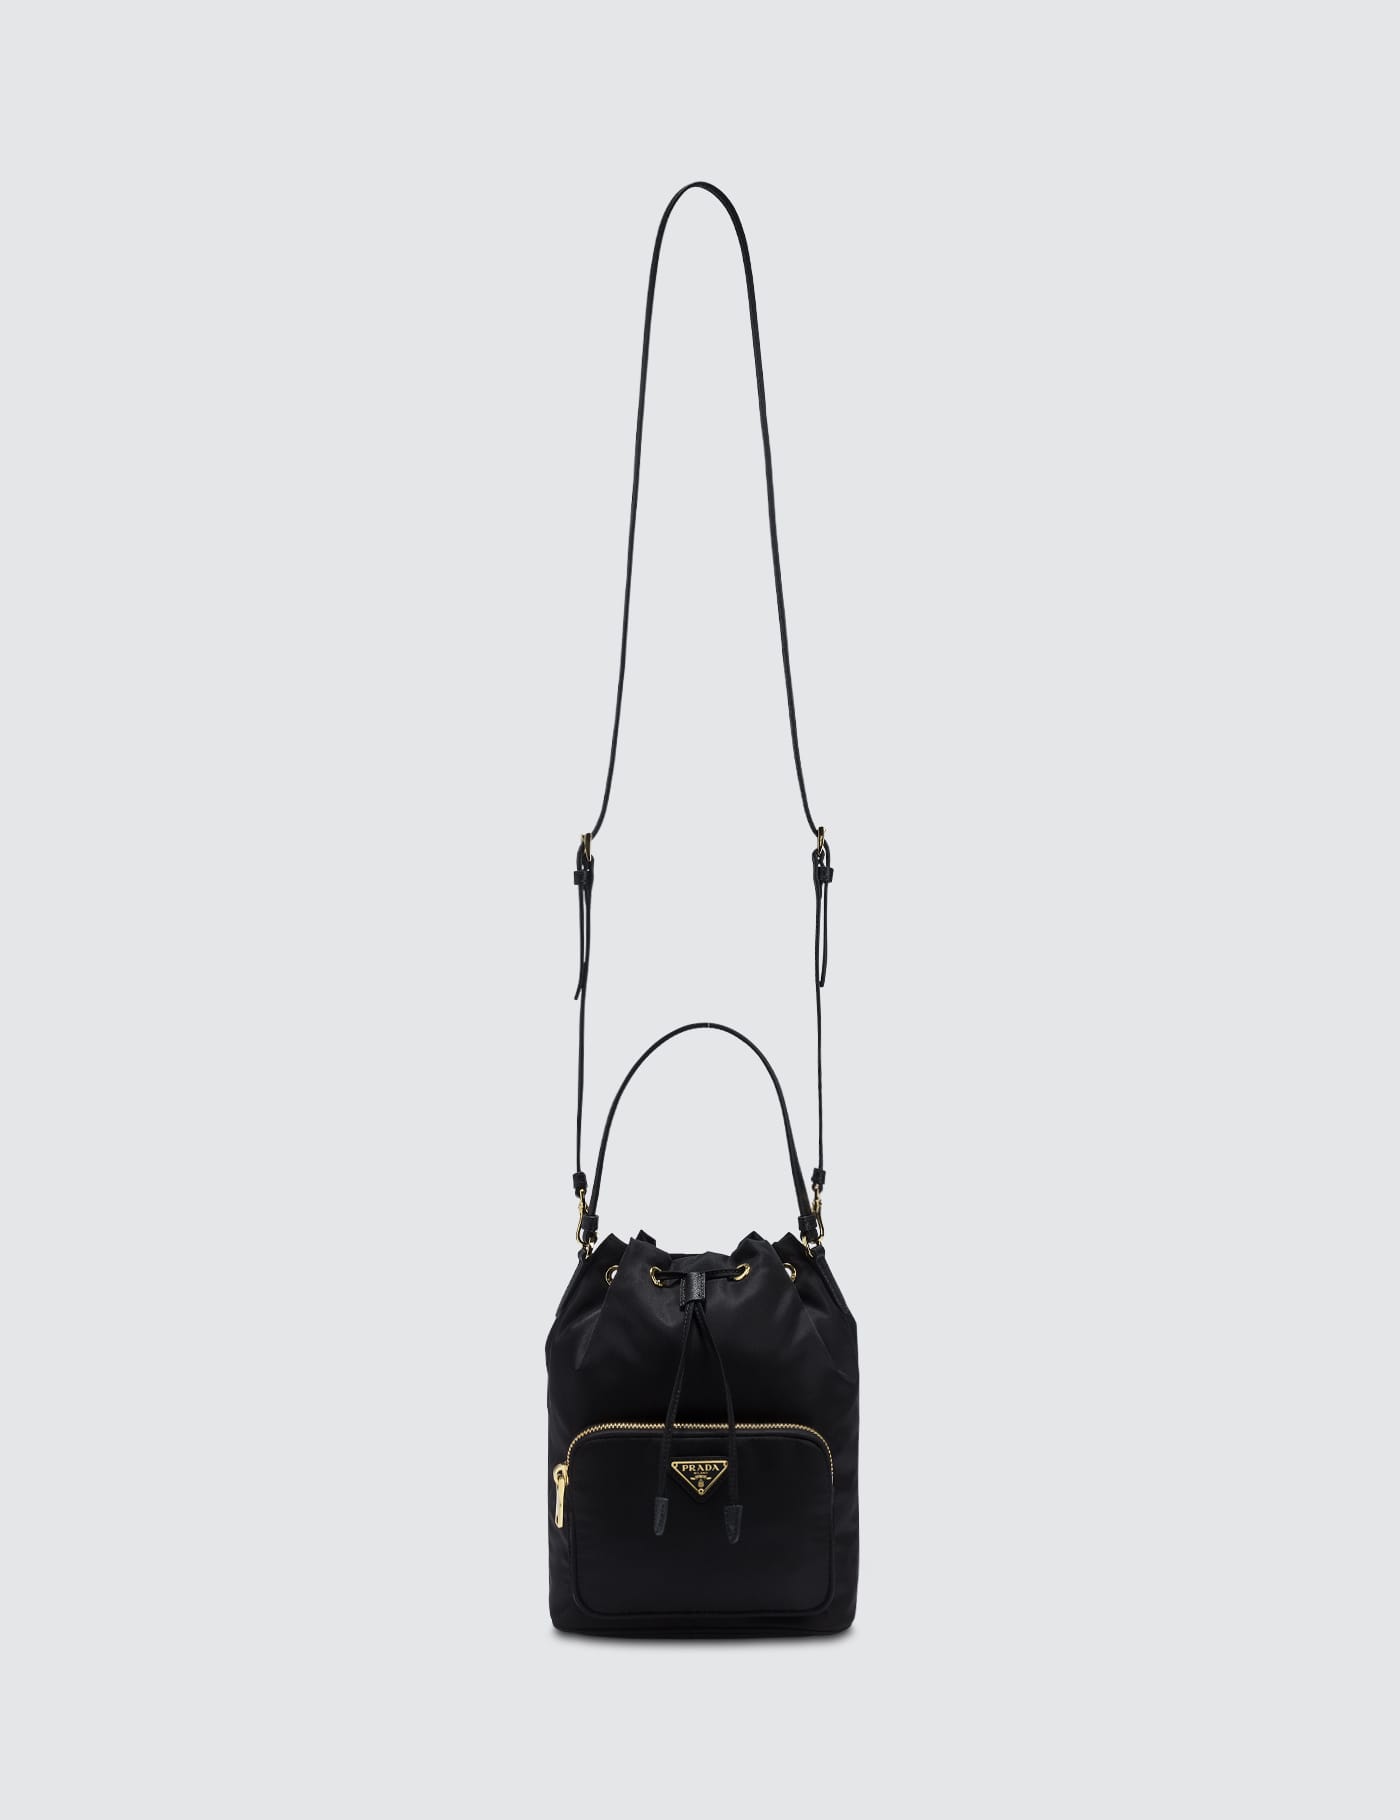 Prada - Gray Grained Leather Bucket Bag | Mitchell Stores